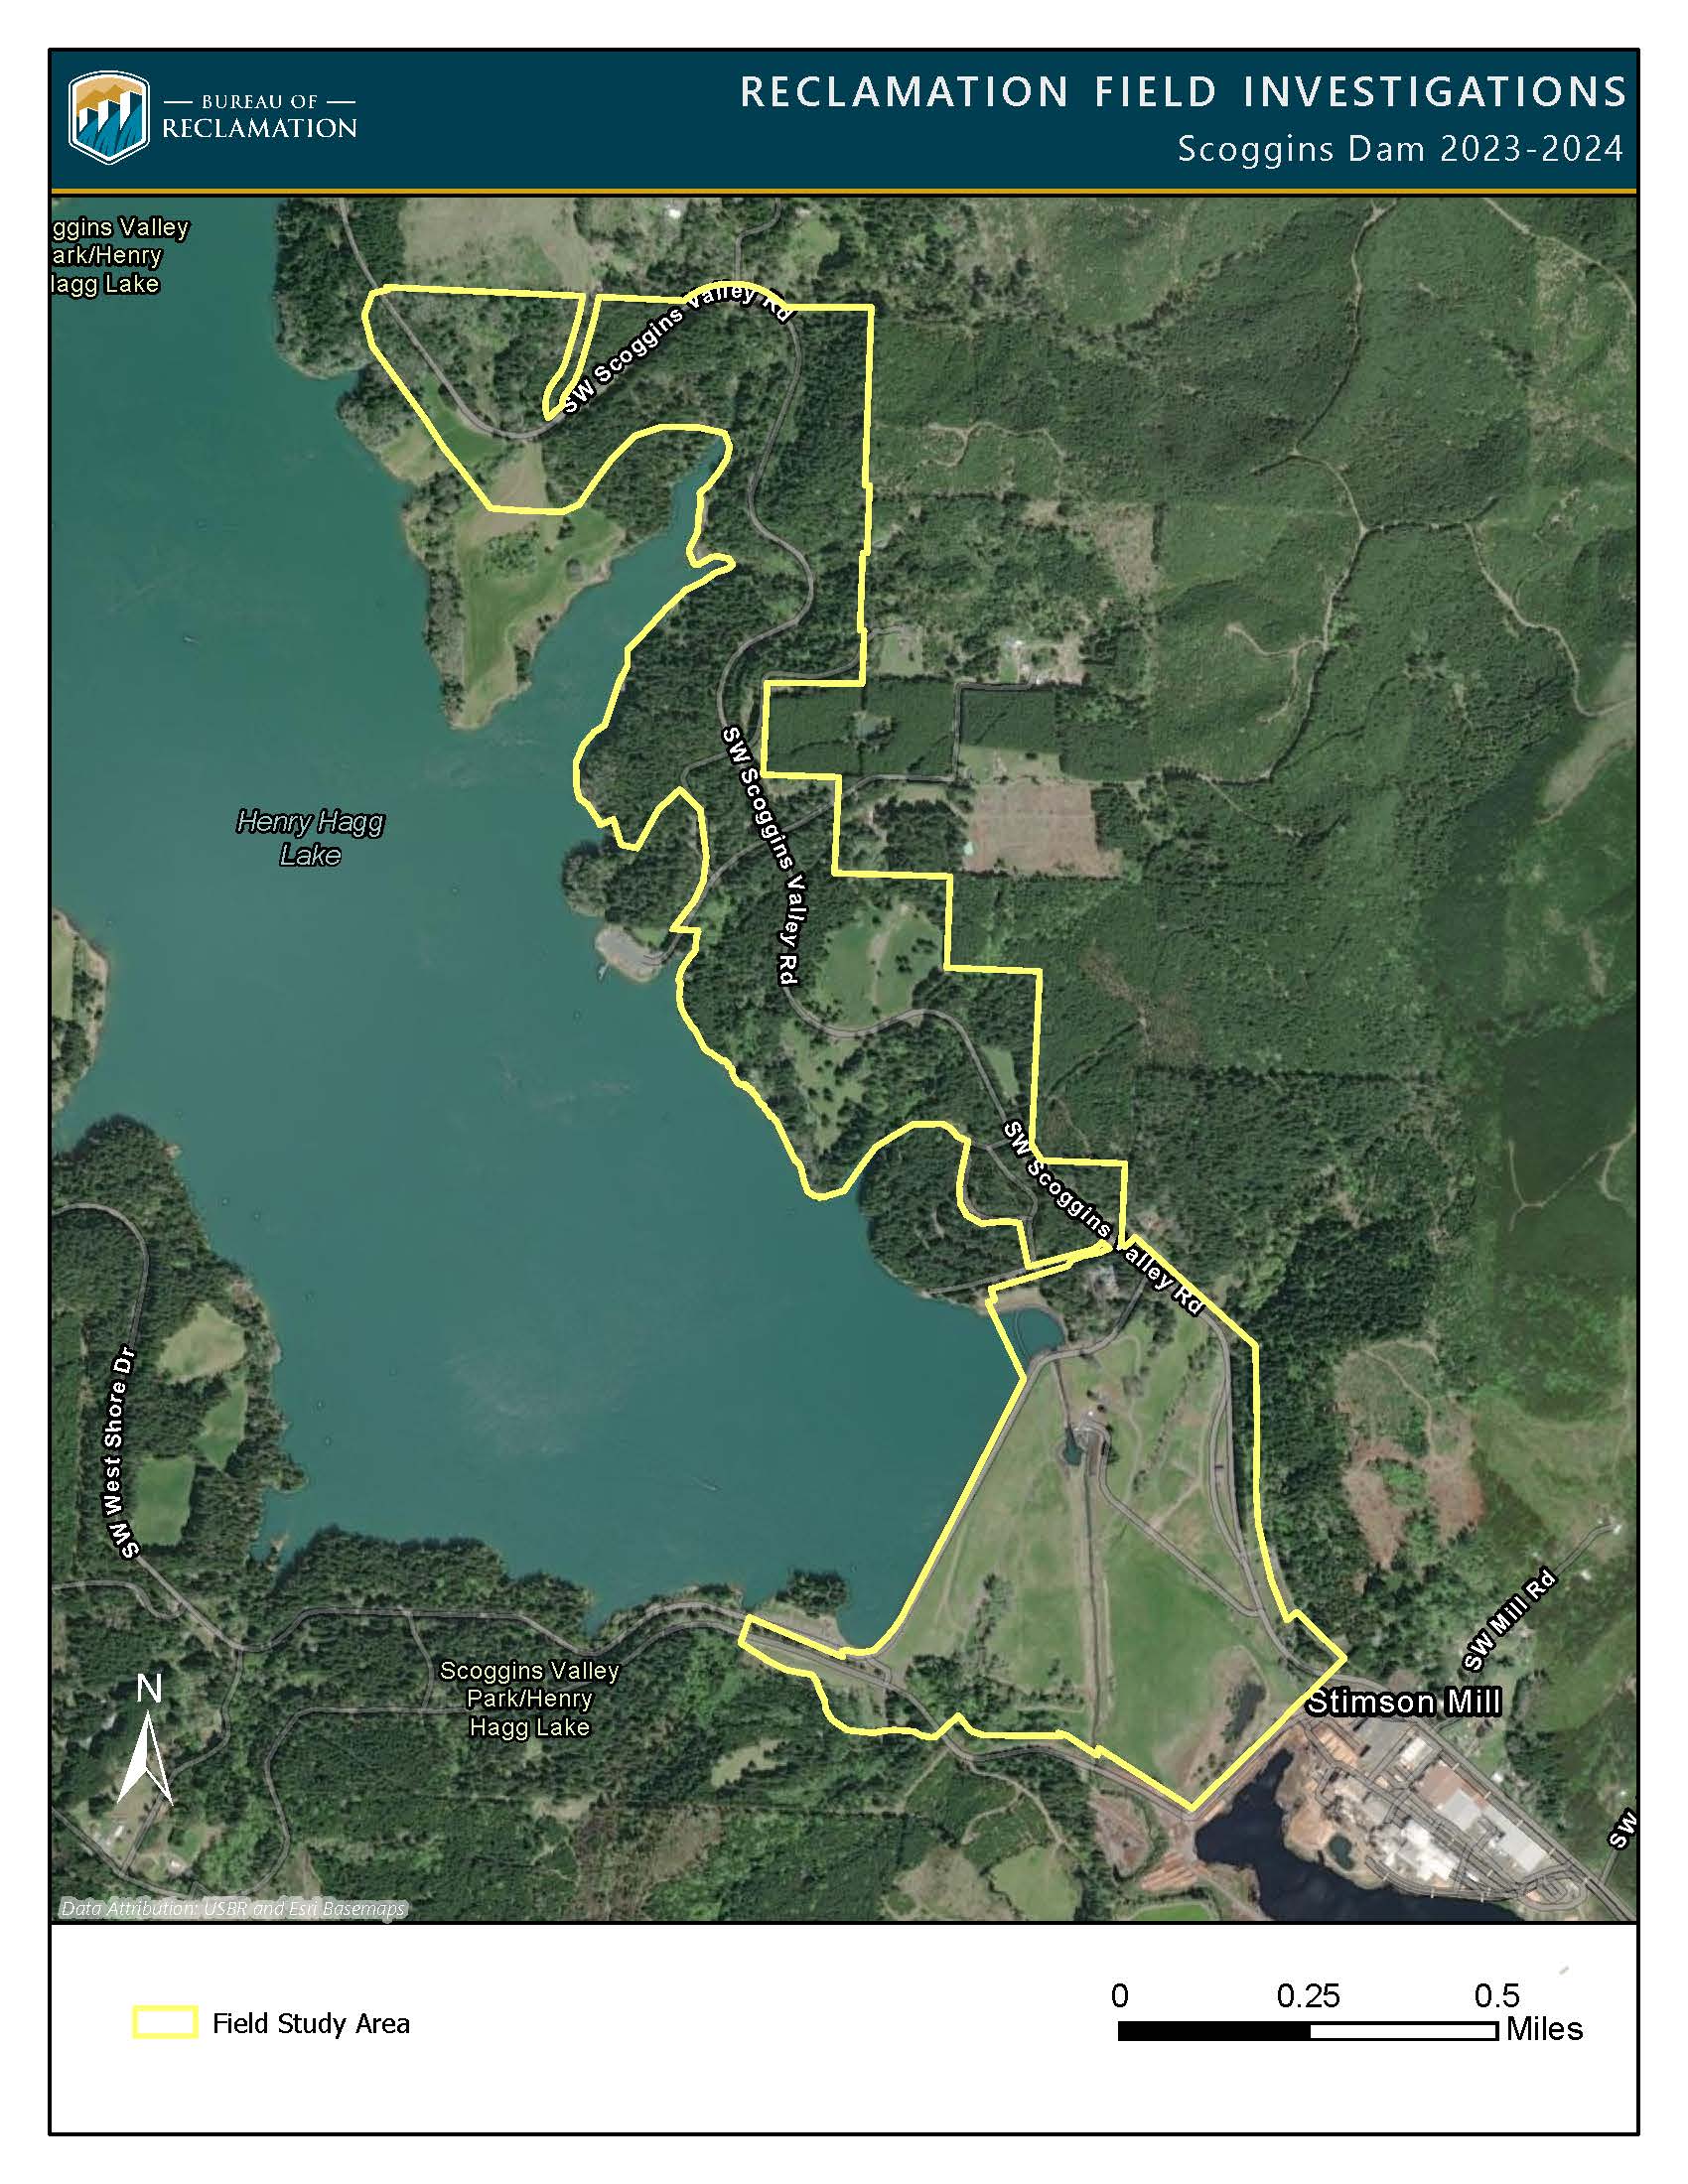 Beginning this fall and extending into spring and summer 2024, Bureau of Reclamation employees and contractors will be conducting field investigations in and around Scoggins Dam and Henry Hagg Lake for a safety of dams project. The study areas where Reclamation employees and contractors may be working are shown on this map. 